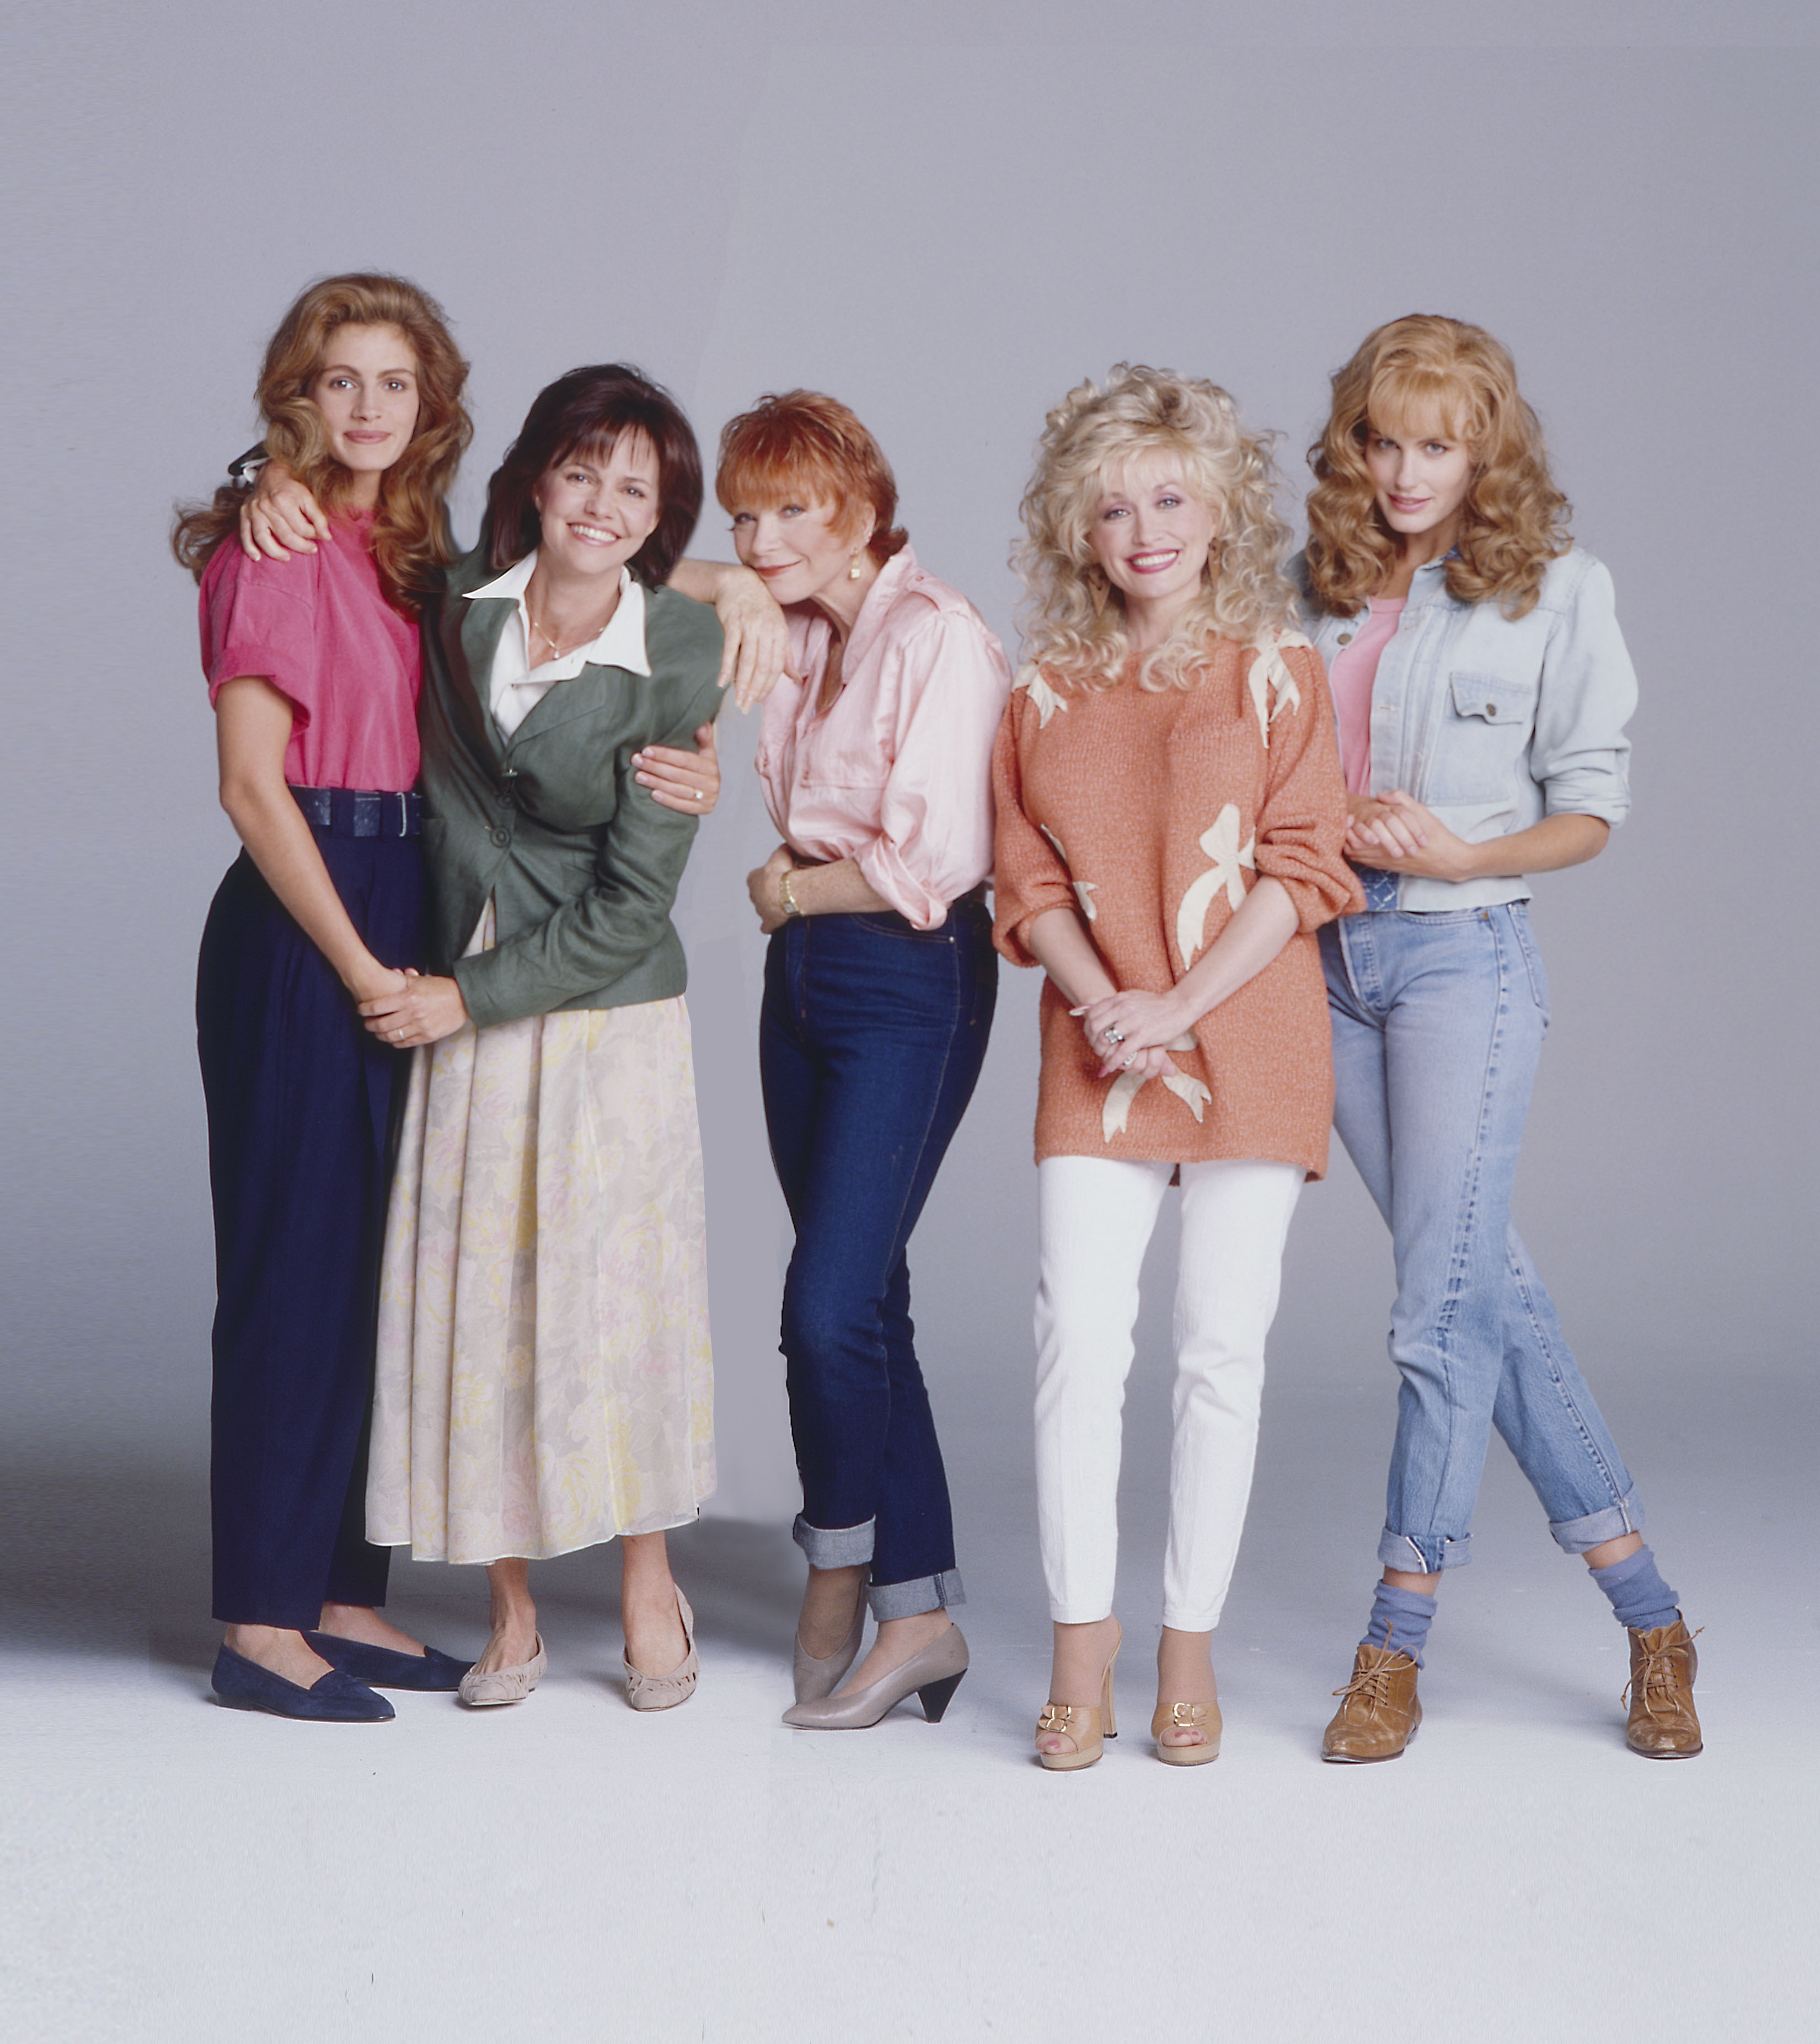 "Steel Magnolias" actresses Julia Roberts, Sally Field, Shirley MacClaine, Dolly Parton, and Daryl Hannah pose for a portrait in October 1989 in Los Angeles, California. | Source: Getty Images